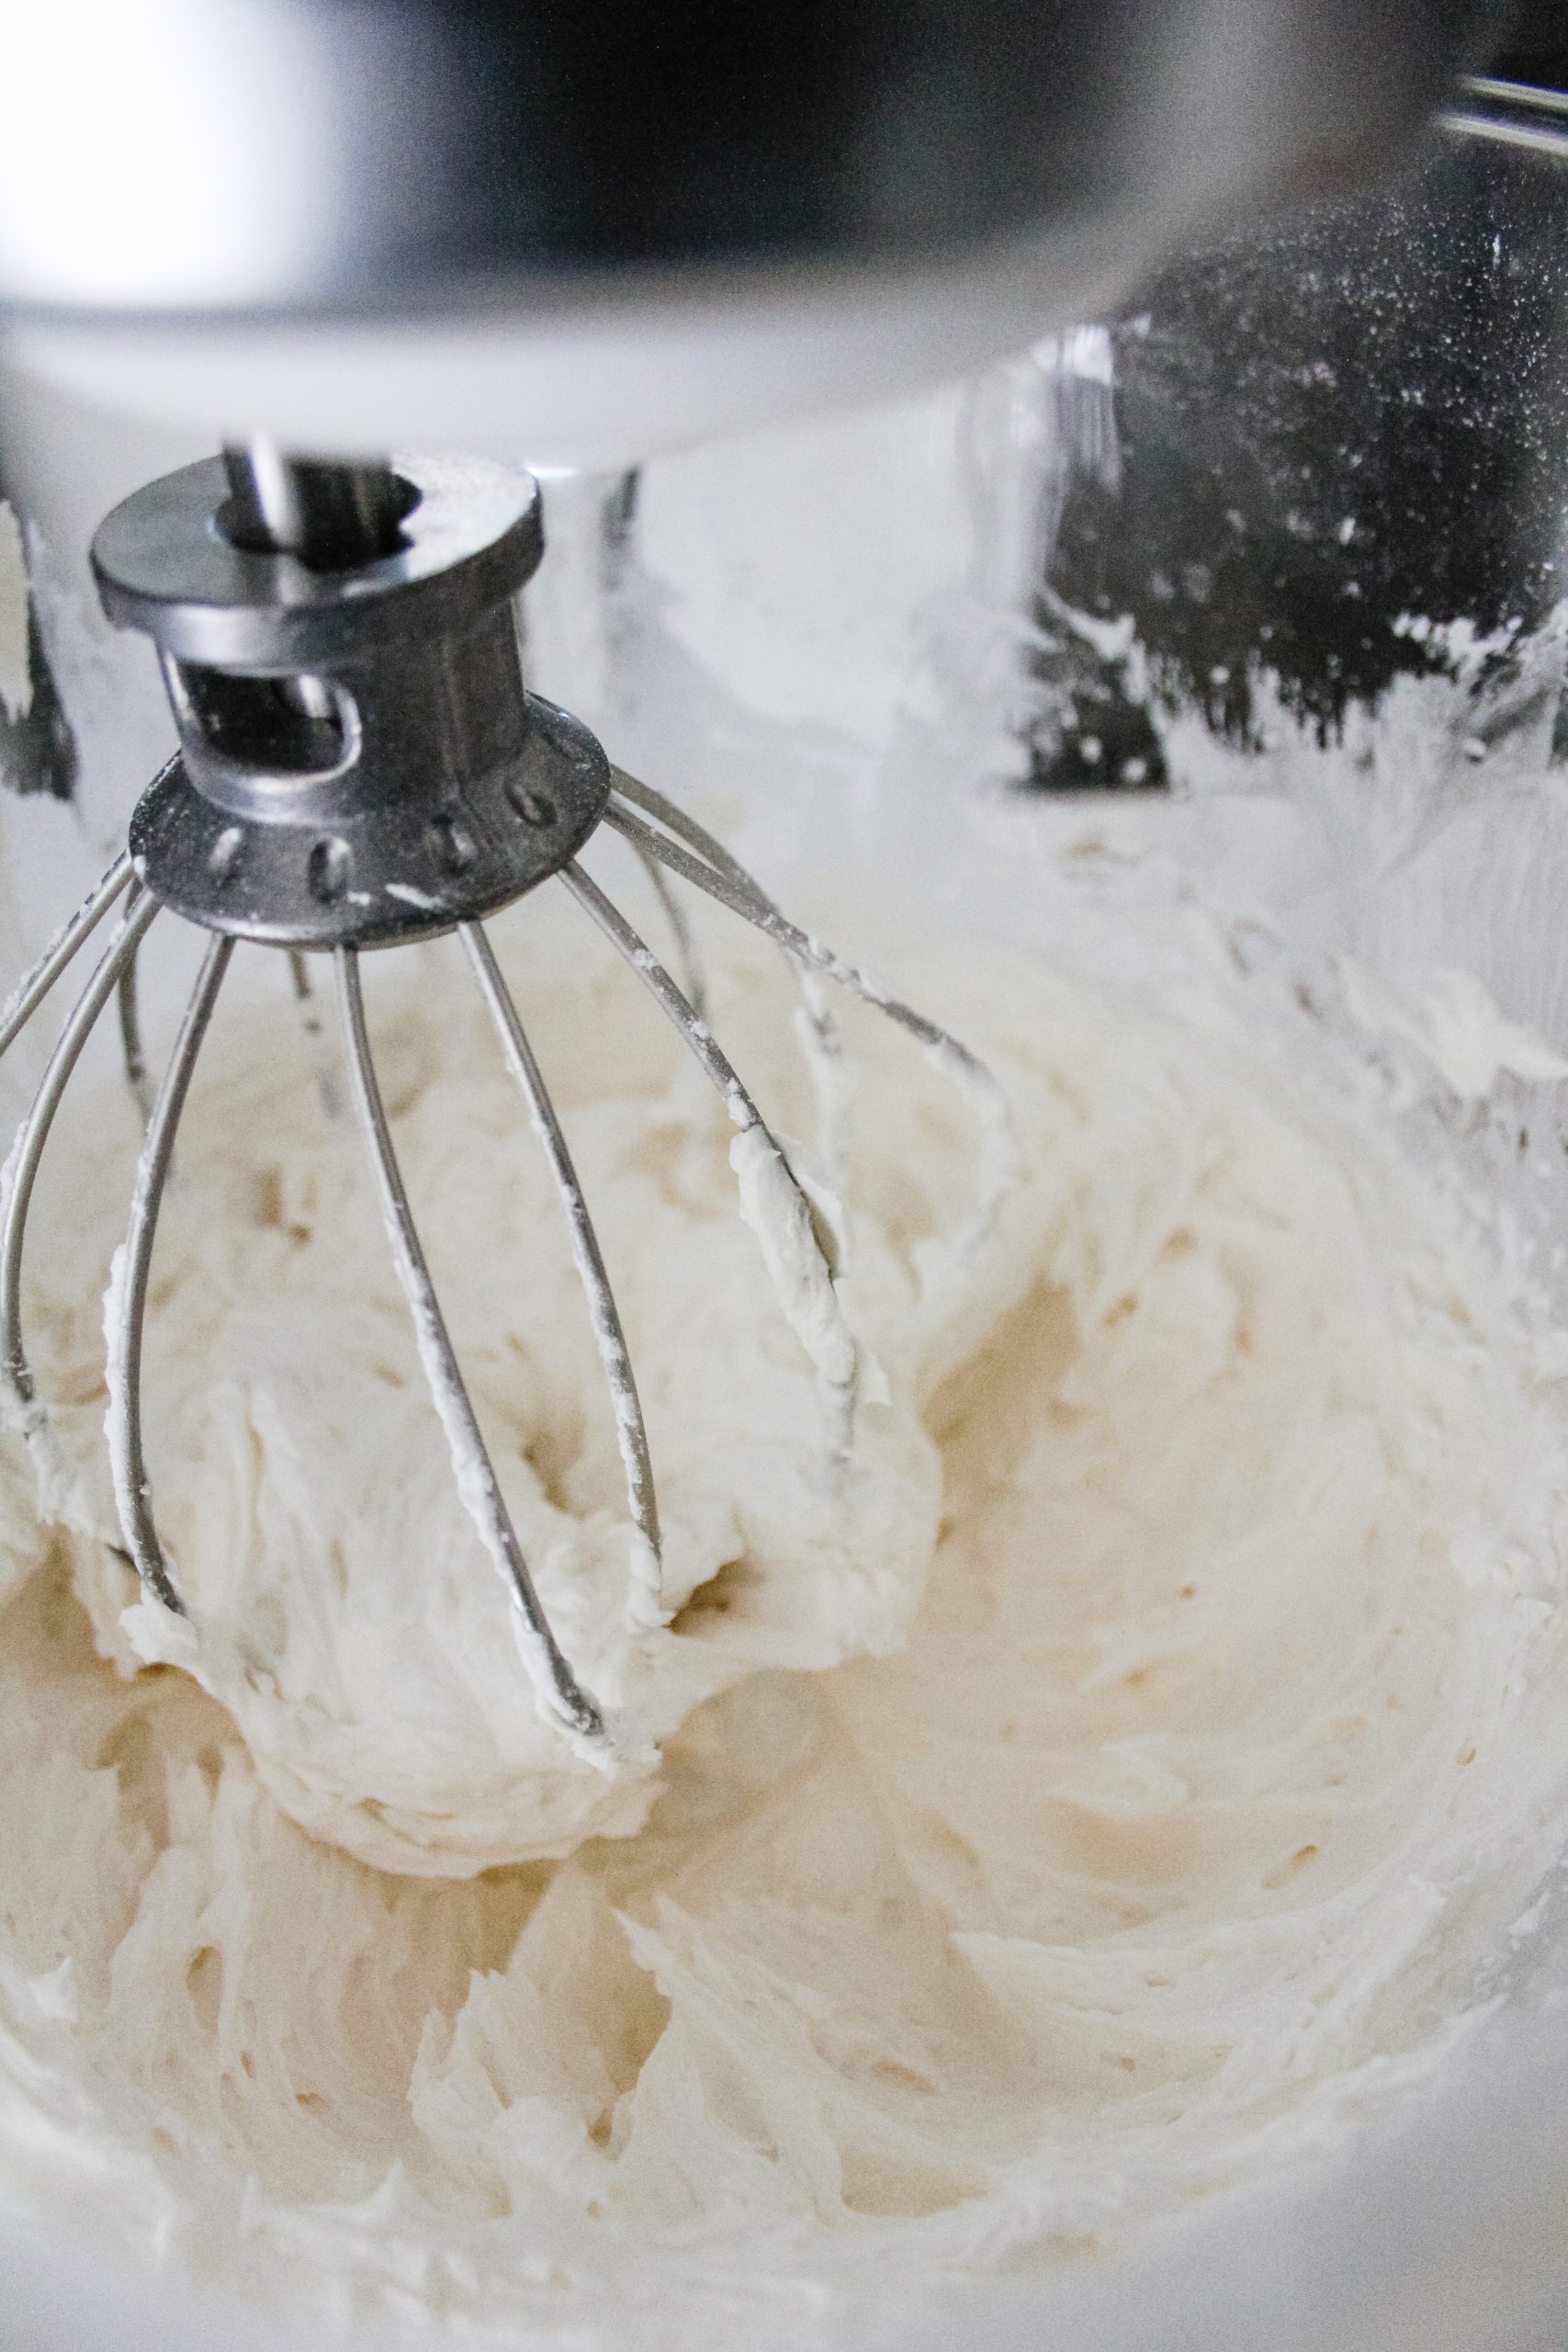 whipped cream cheese frosting in a kitchenaid stand mixer with the whisk attachment